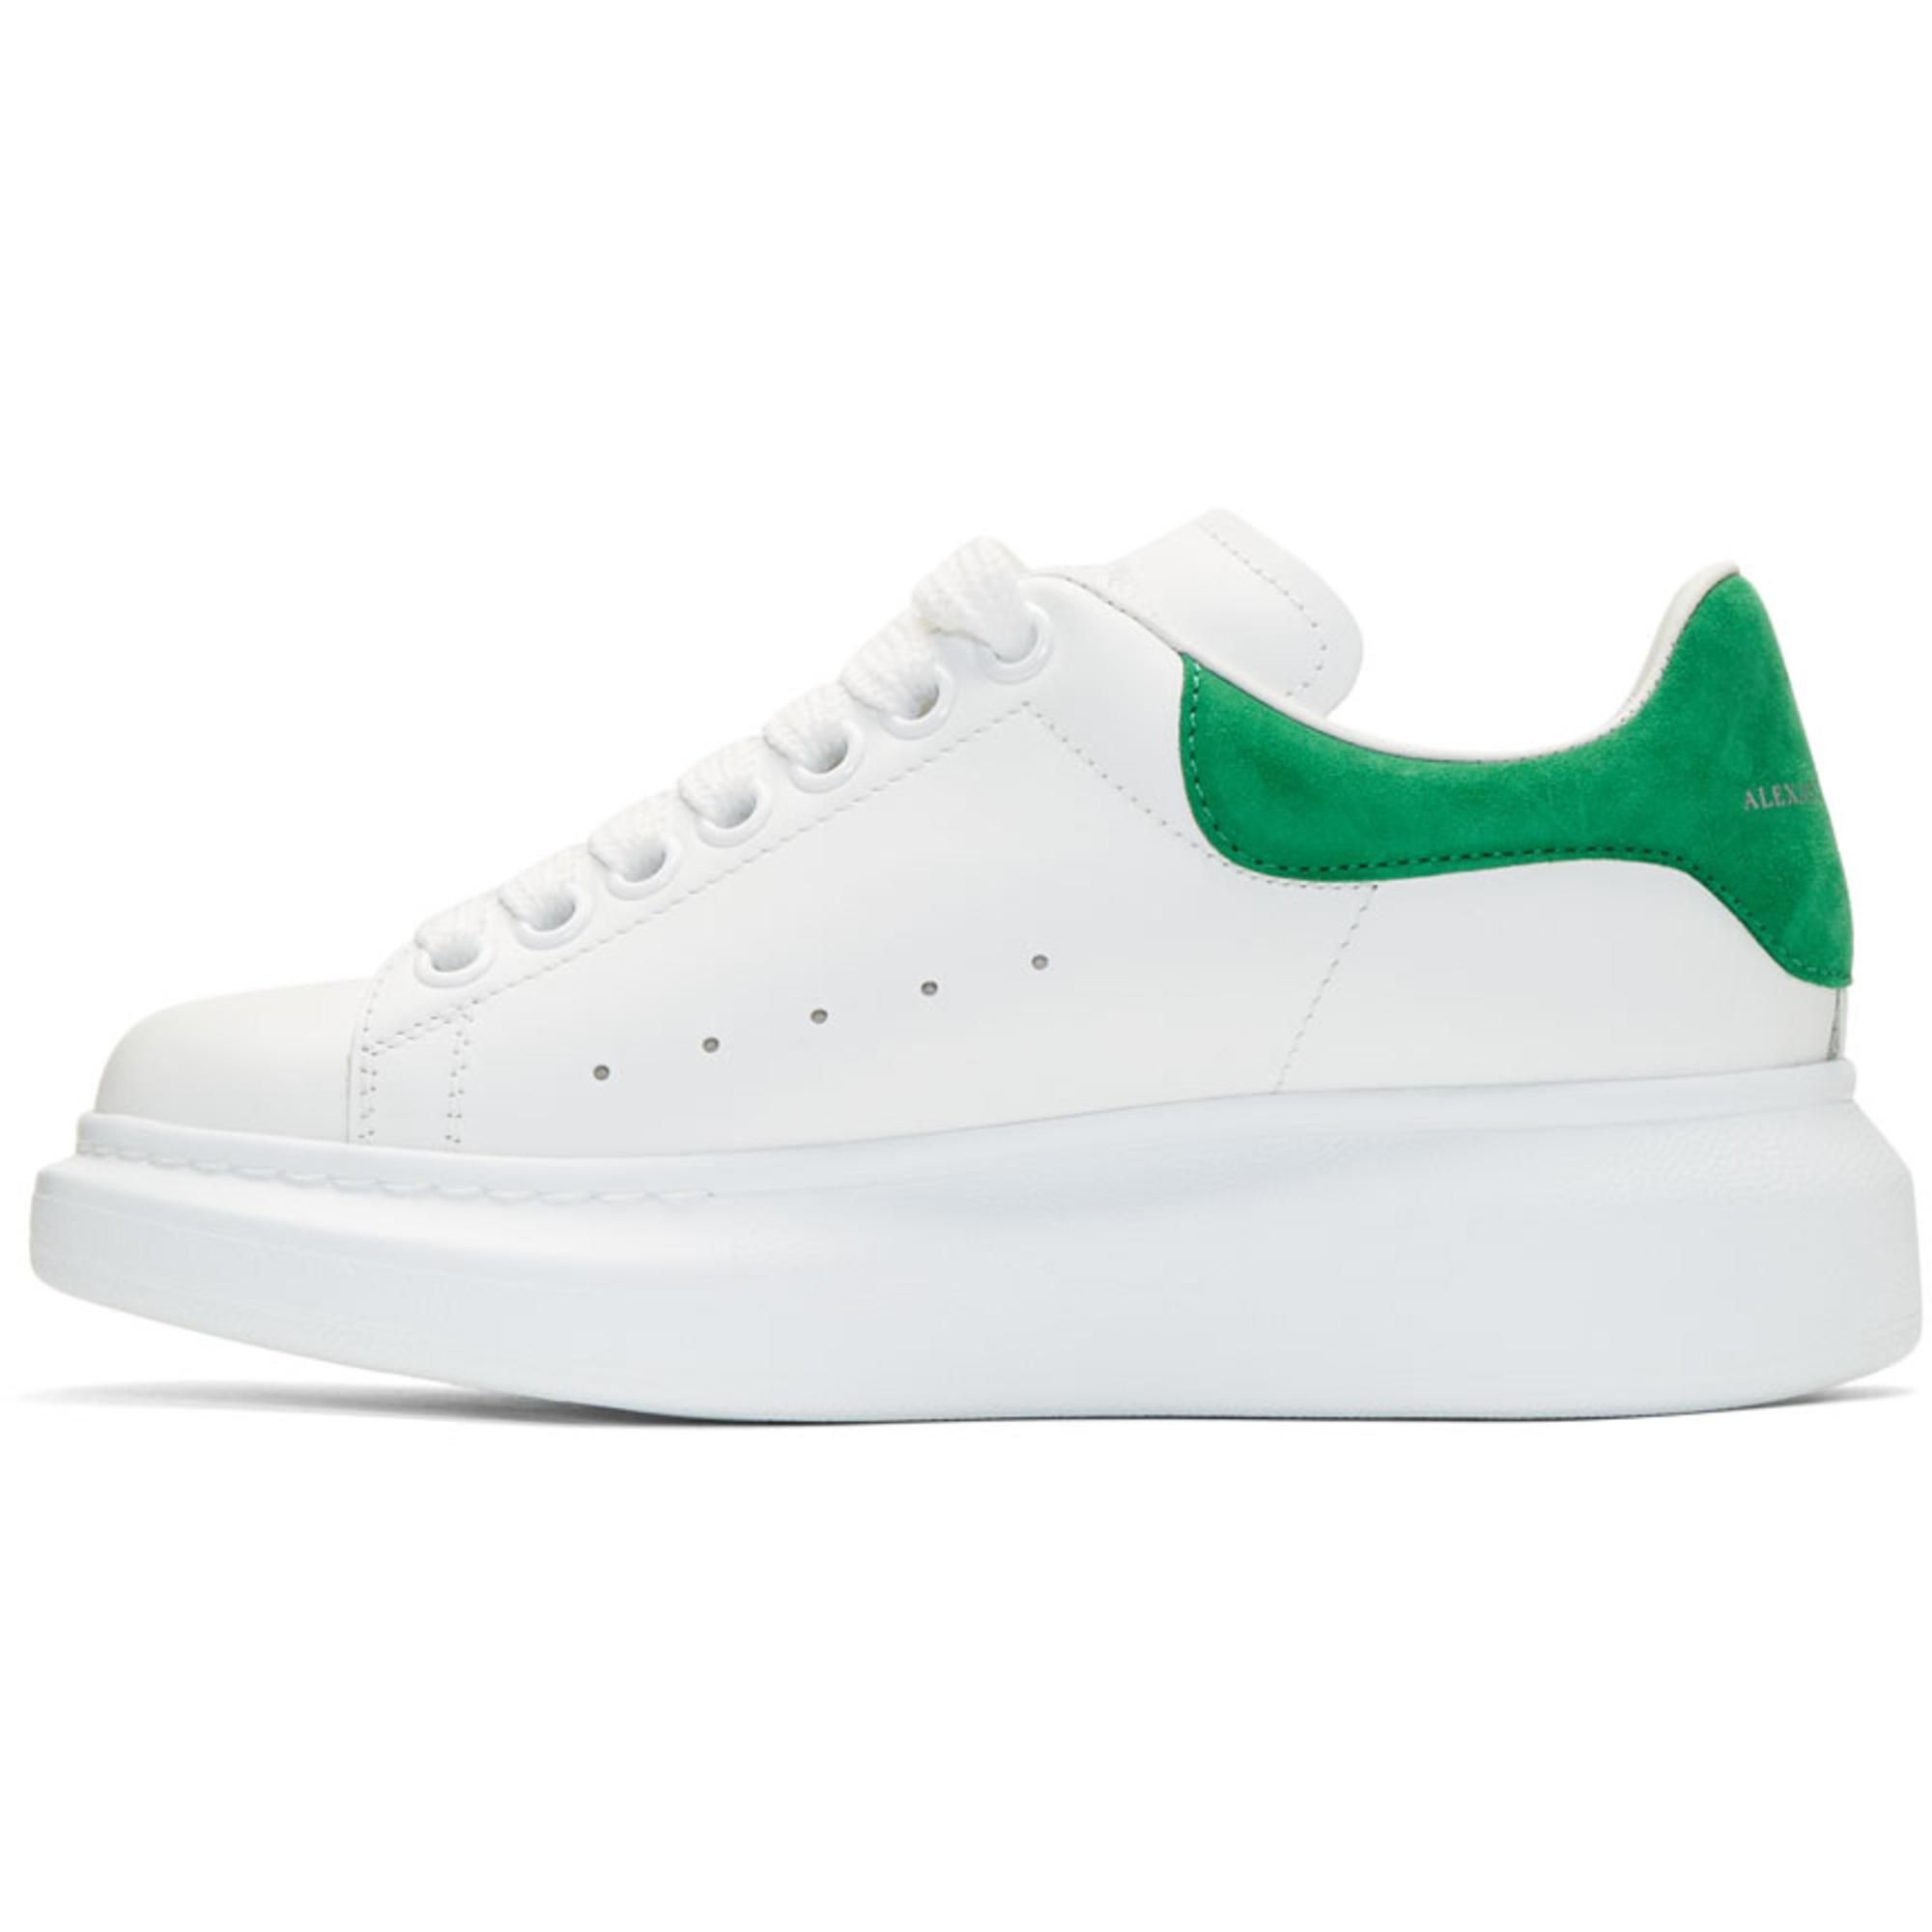 Alexander McQueen Larry White Leather Trainers for Men - Lyst